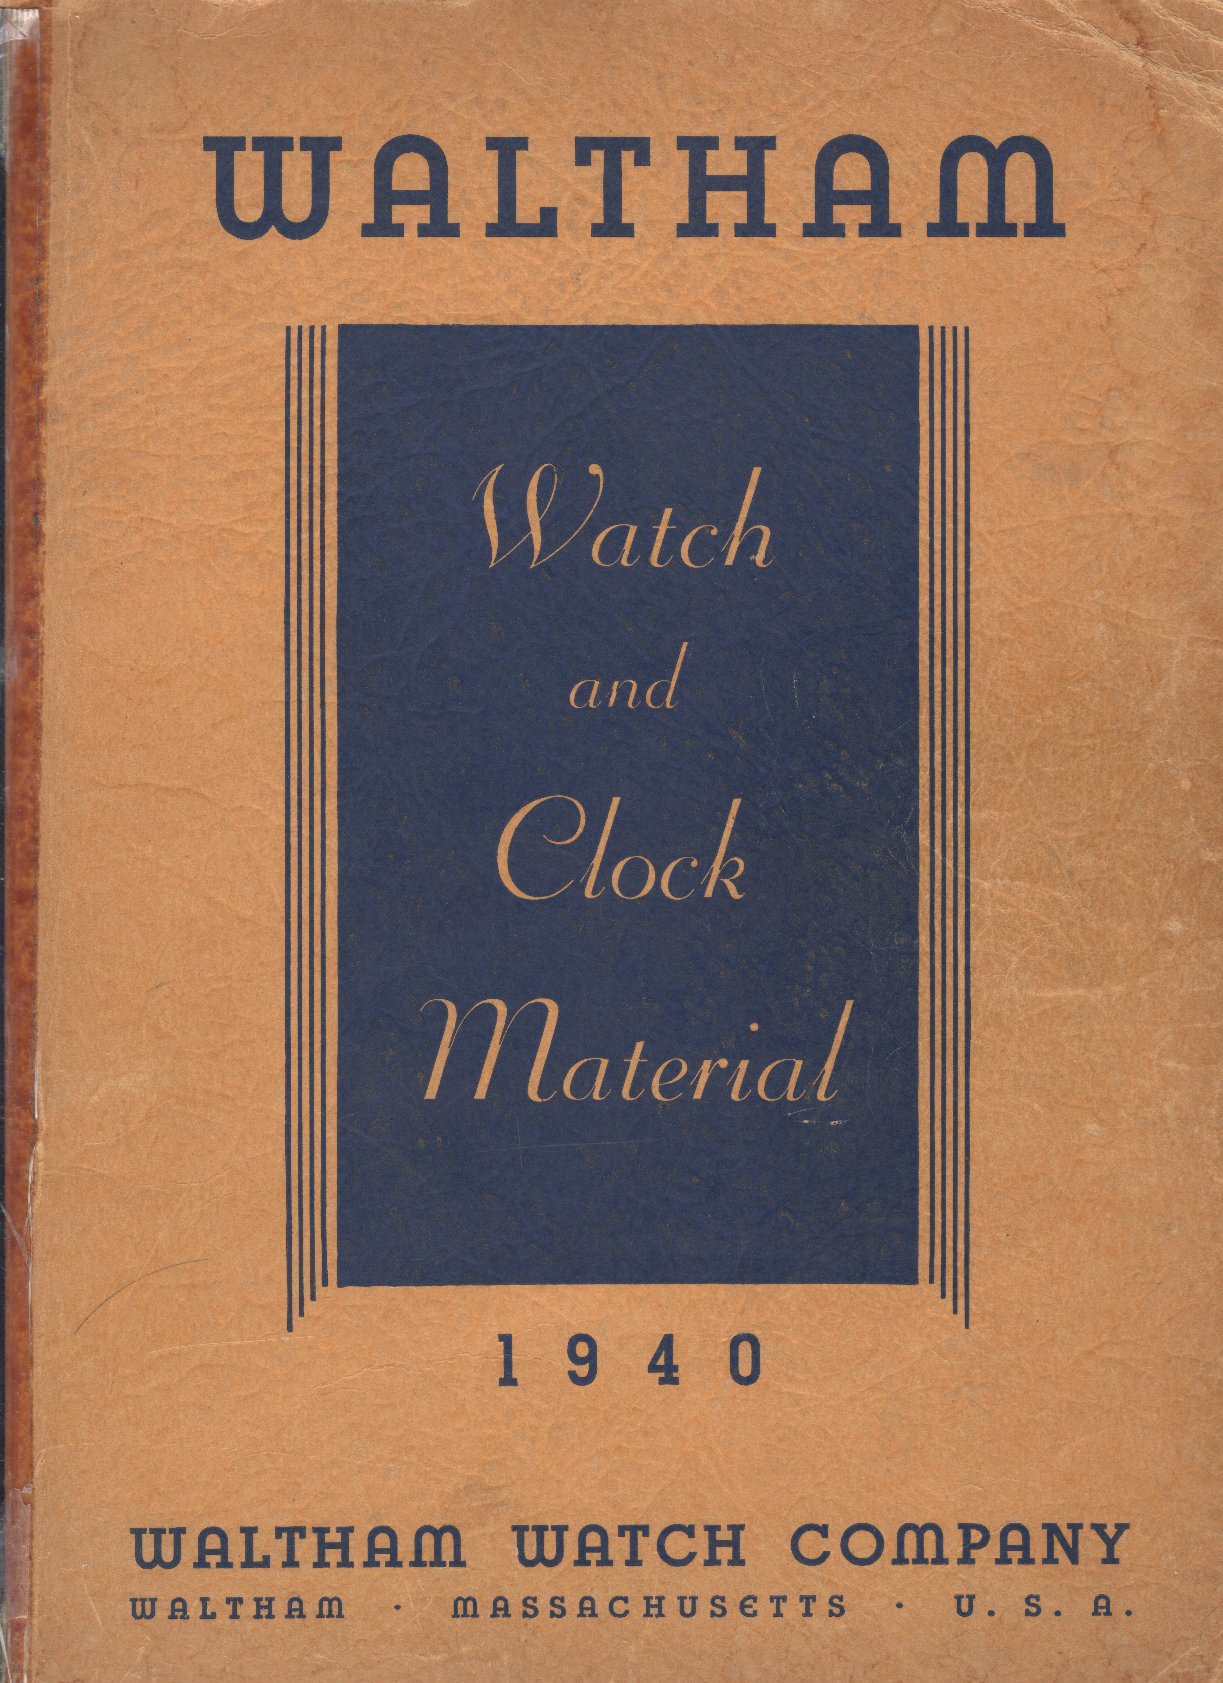 1940 Waltham Watch and Clock Material Catalog Cover Image